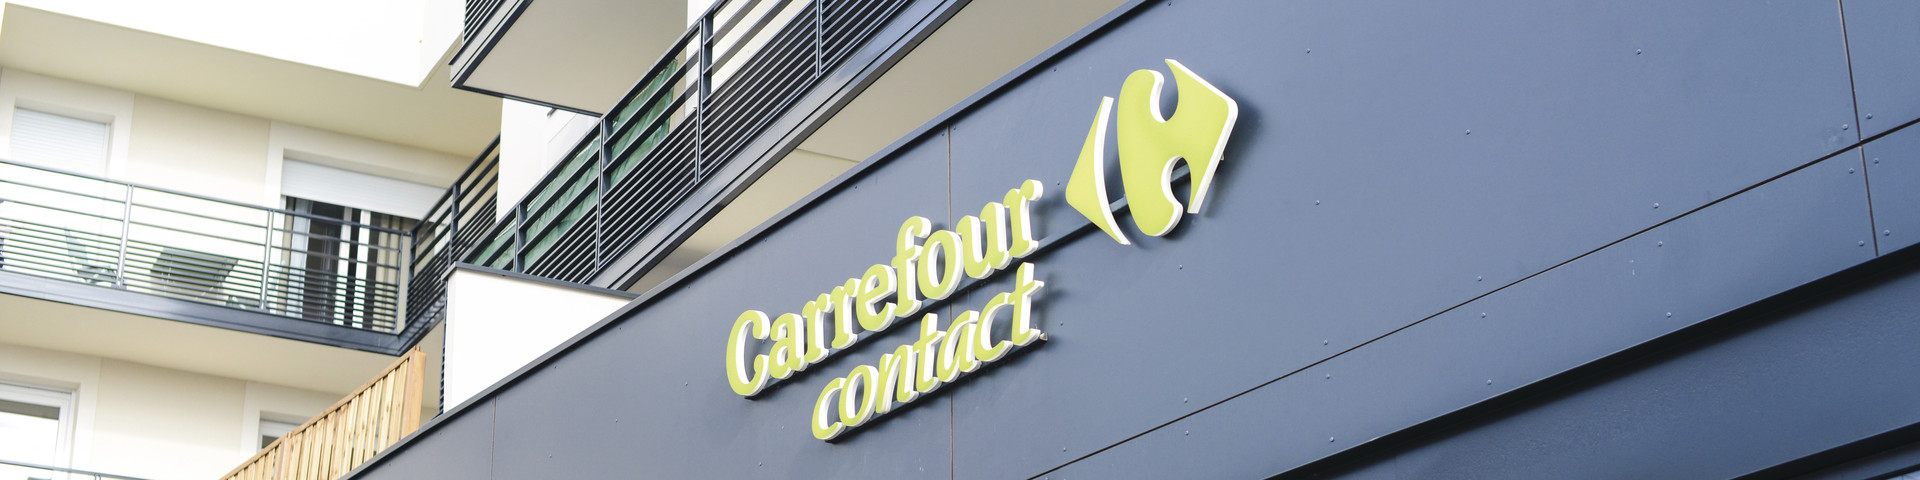 Boutique CARREFOUR CONTACT - Mon commerce  Herblay